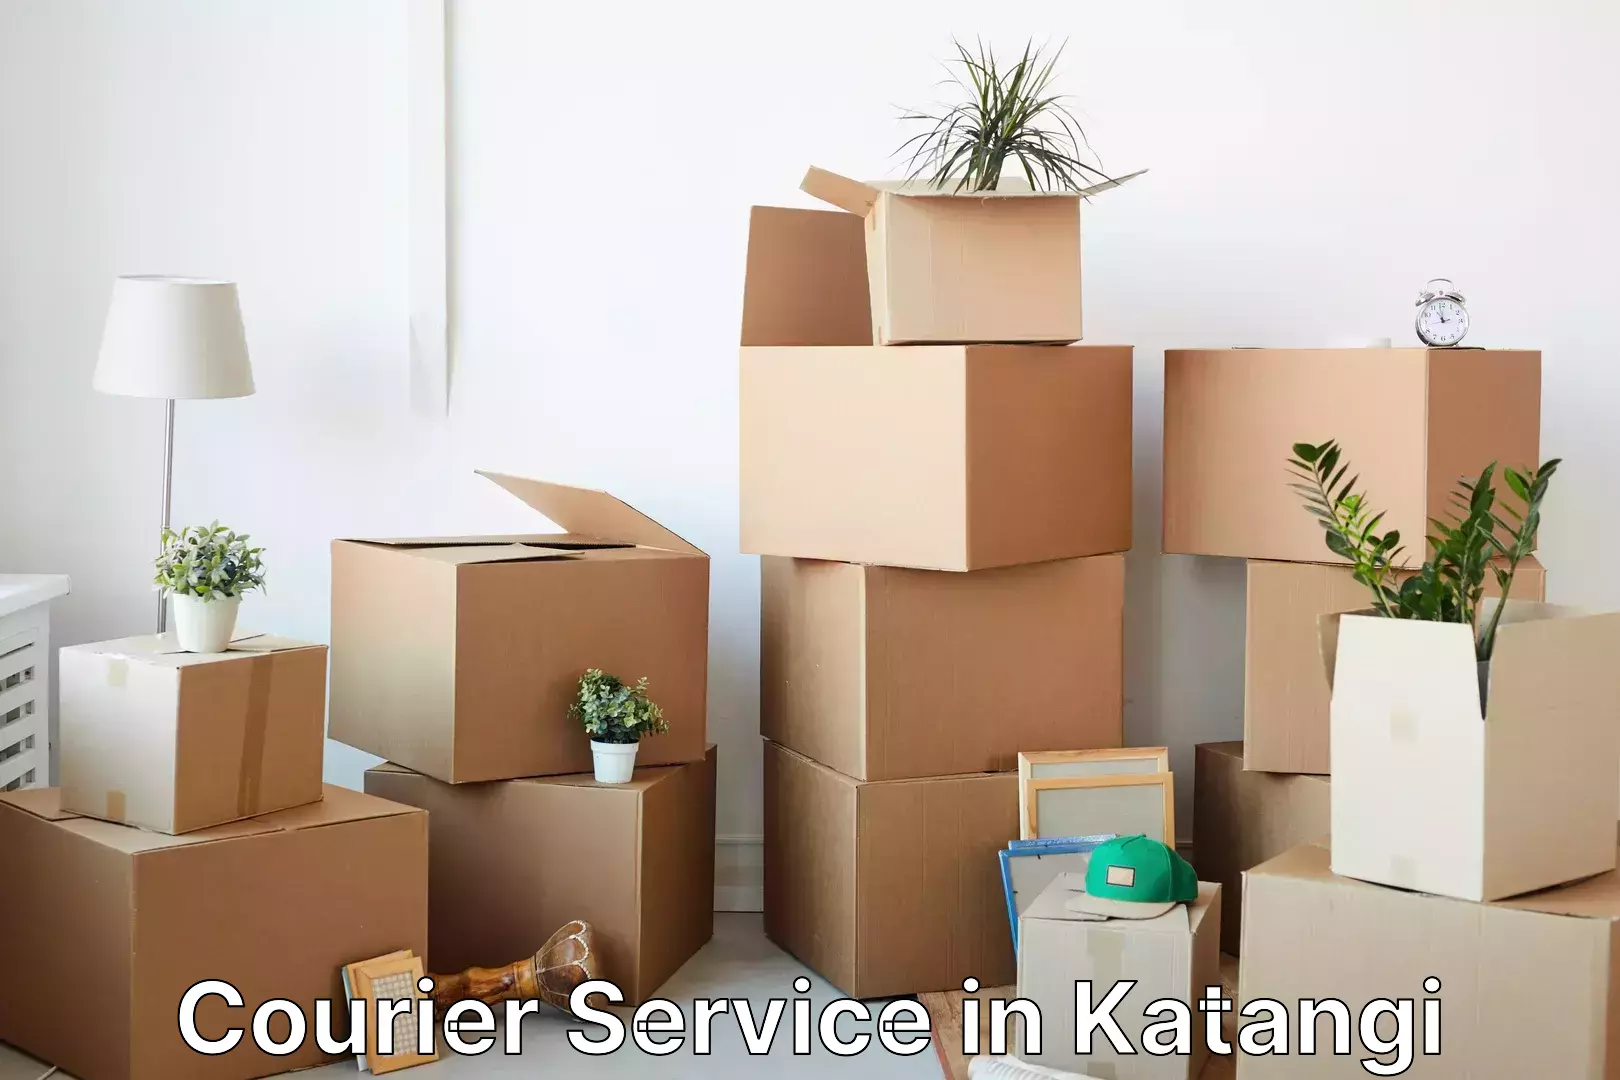 Reliable parcel services in Katangi